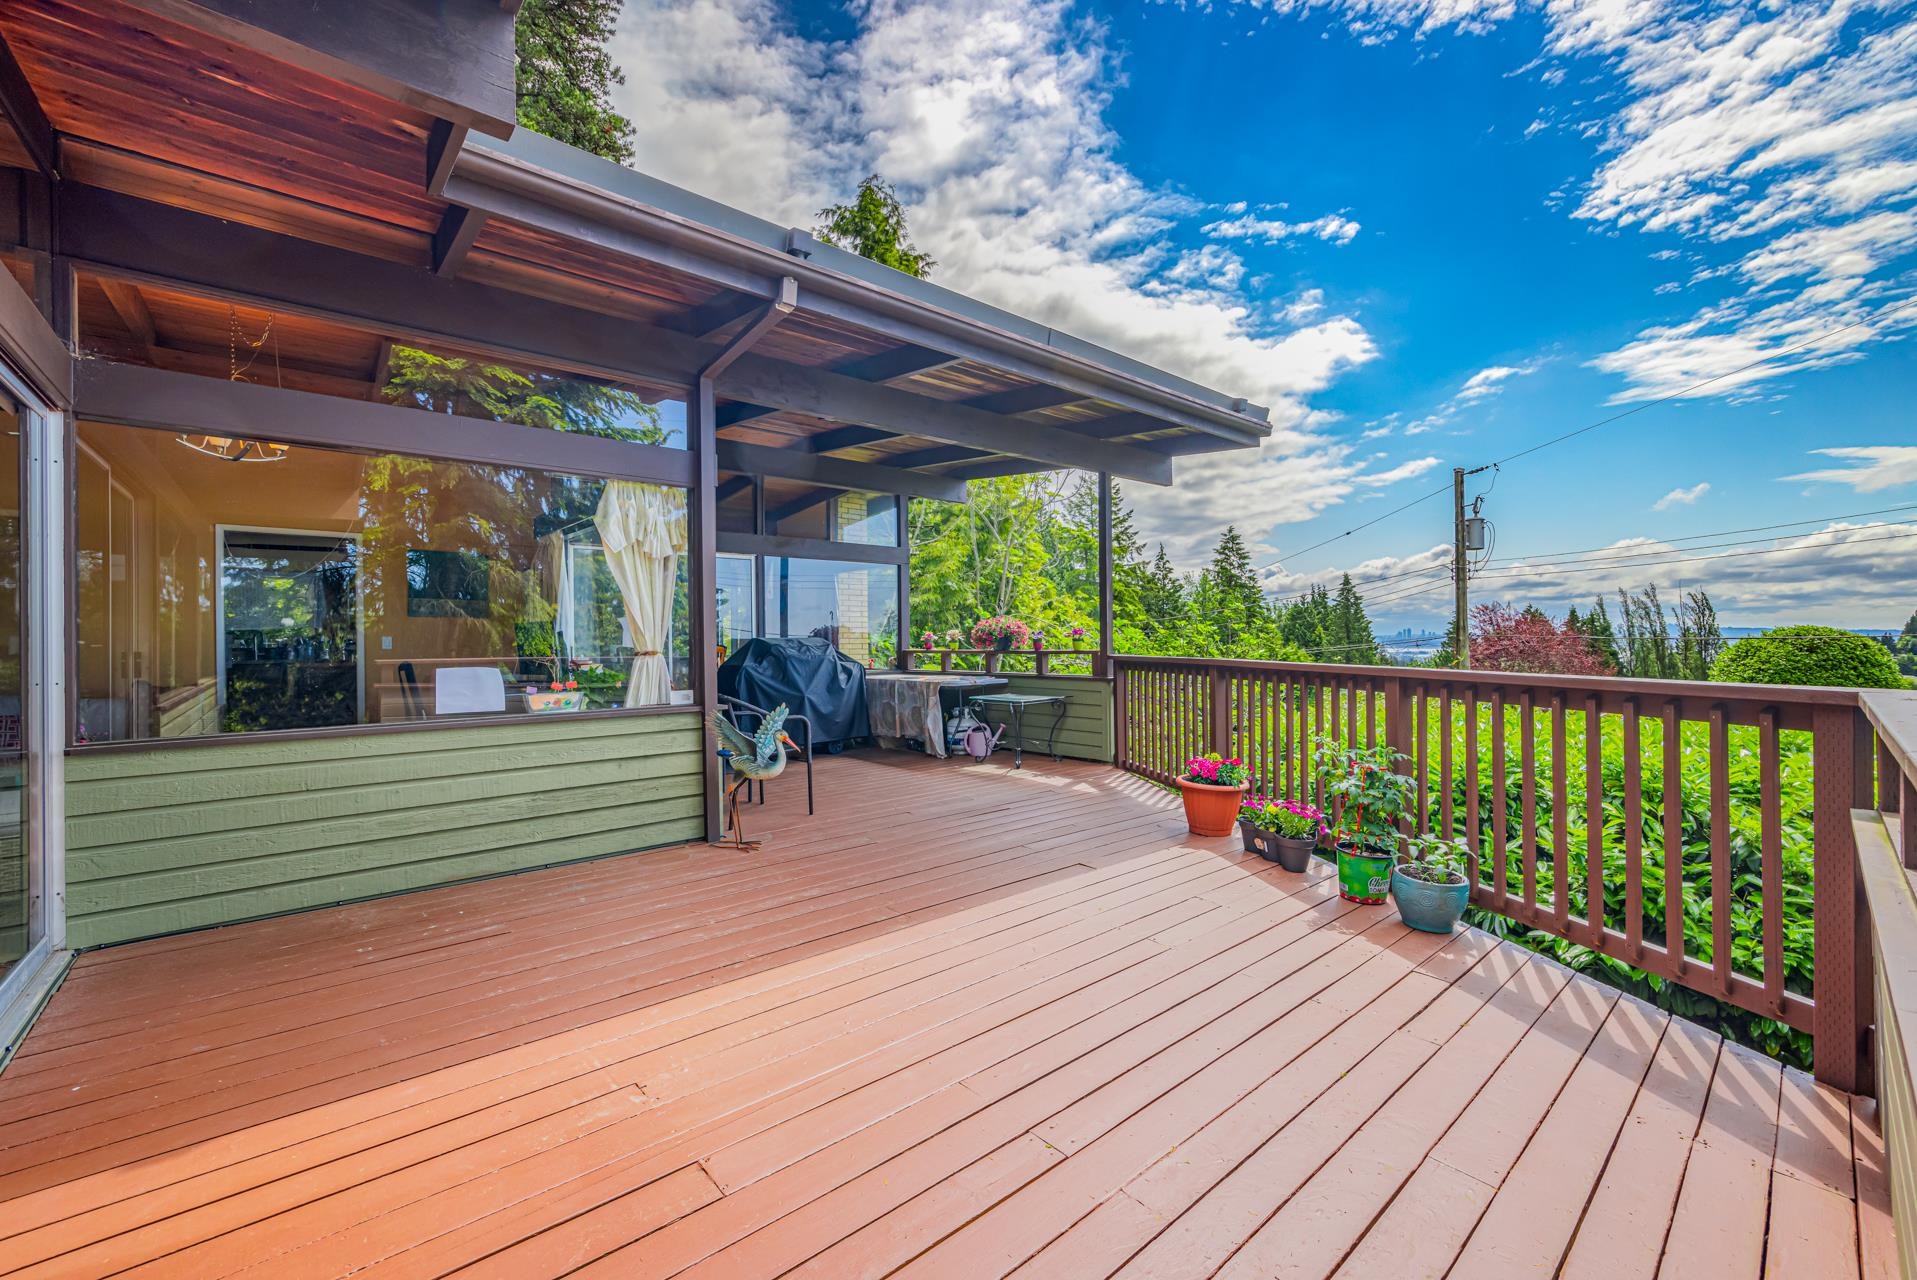 Listing image of 1085 PALMERSTON AVENUE